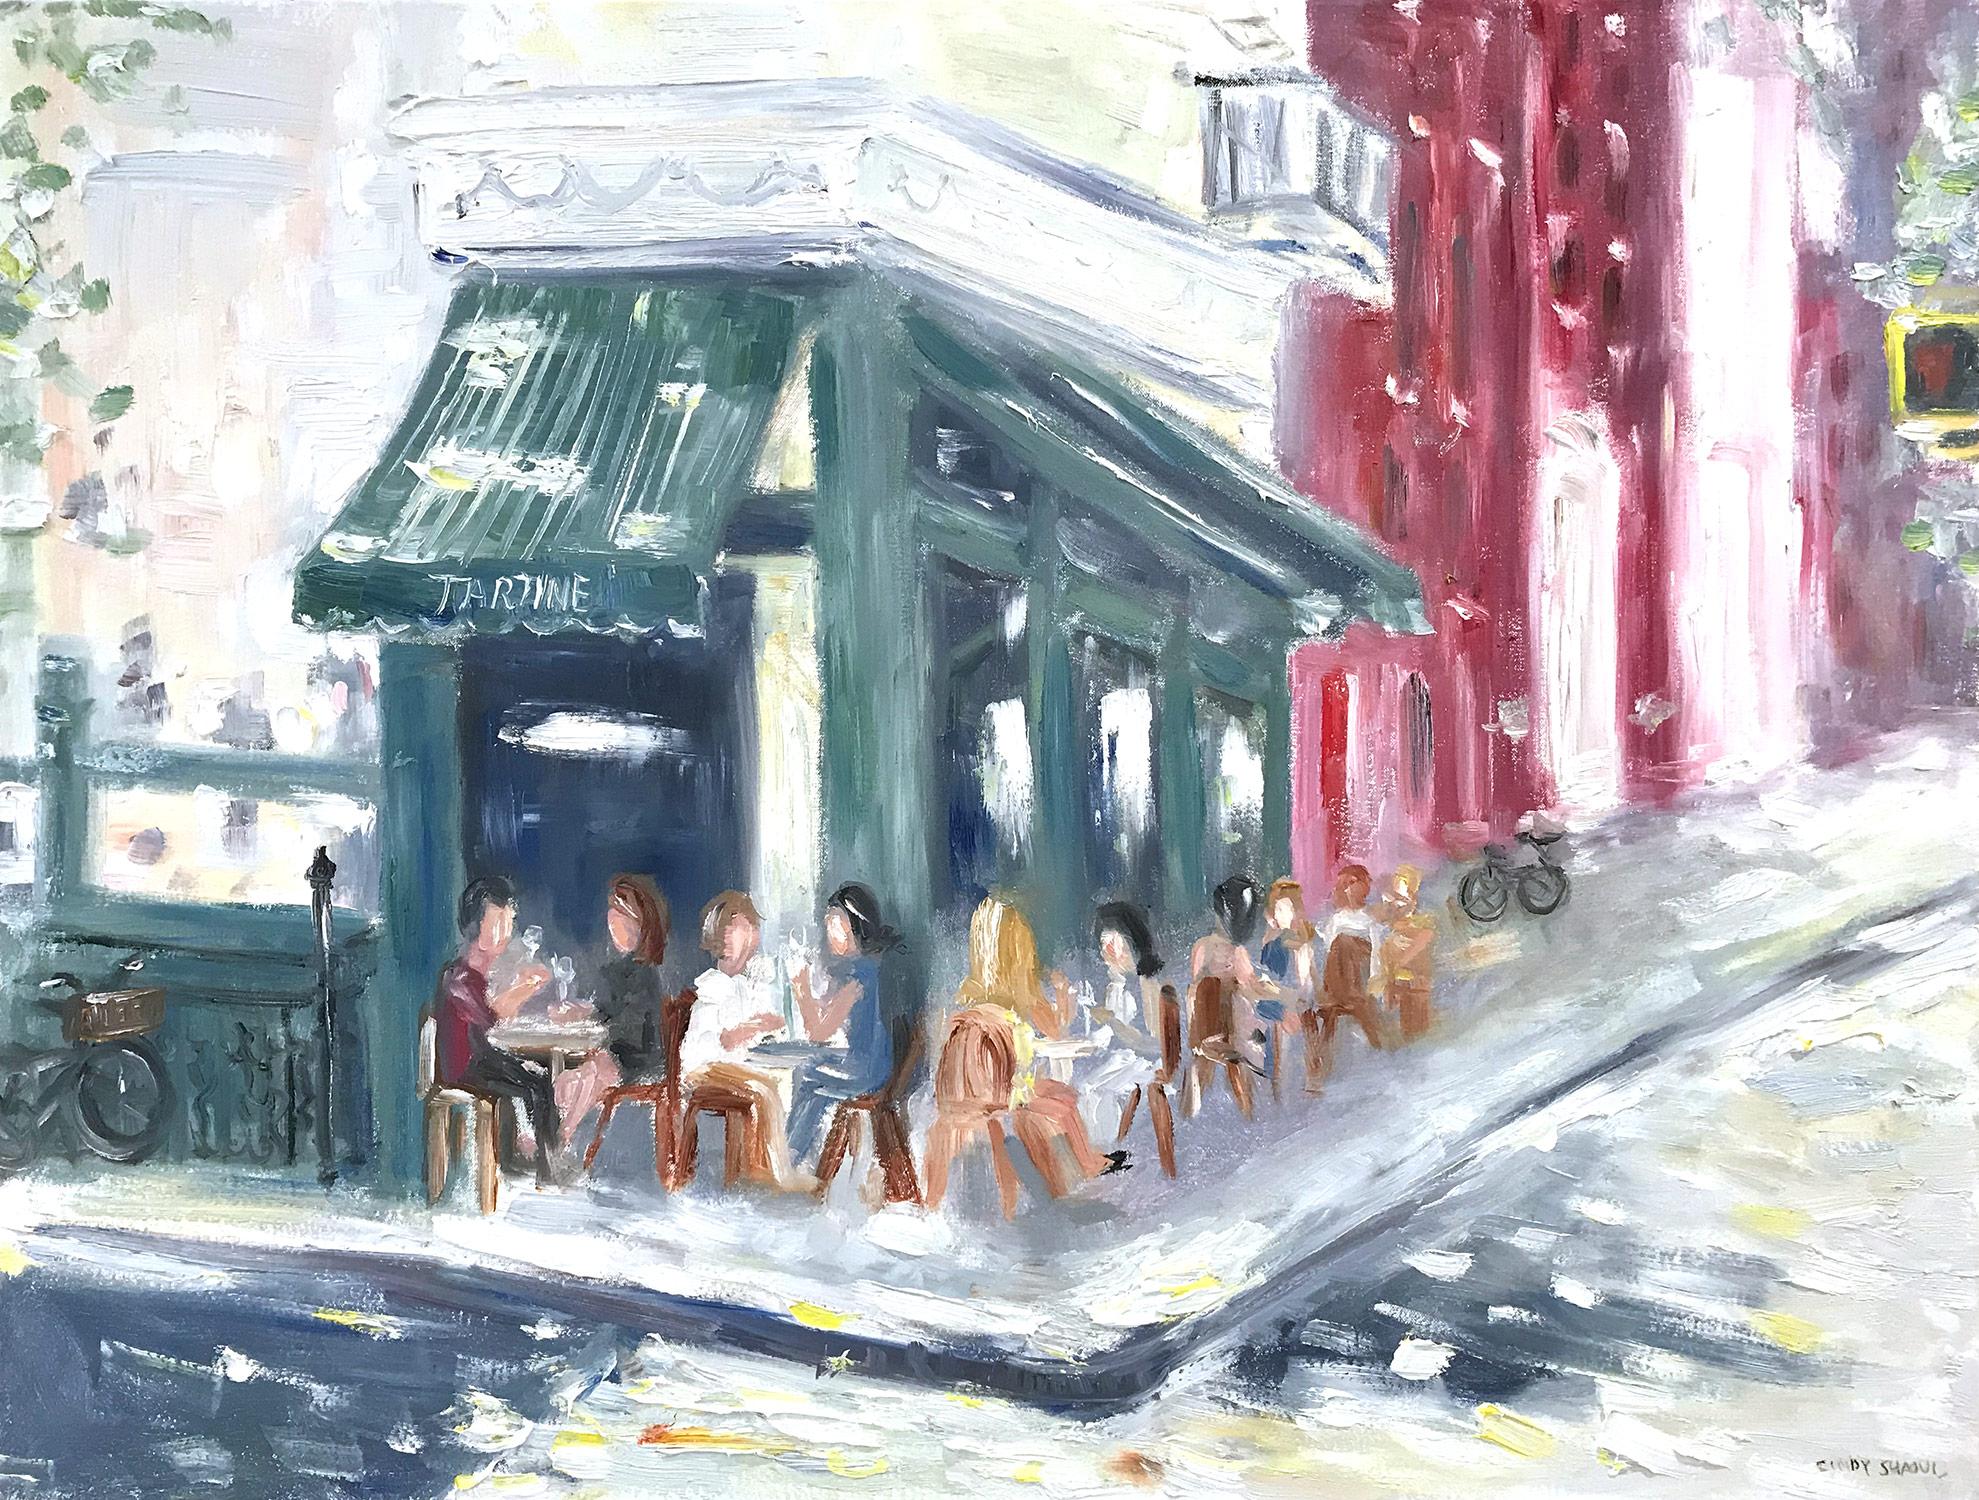 "Brunch at Tartine" NYC Impressionistic Plein Air Scene Oil Painting on Canvas